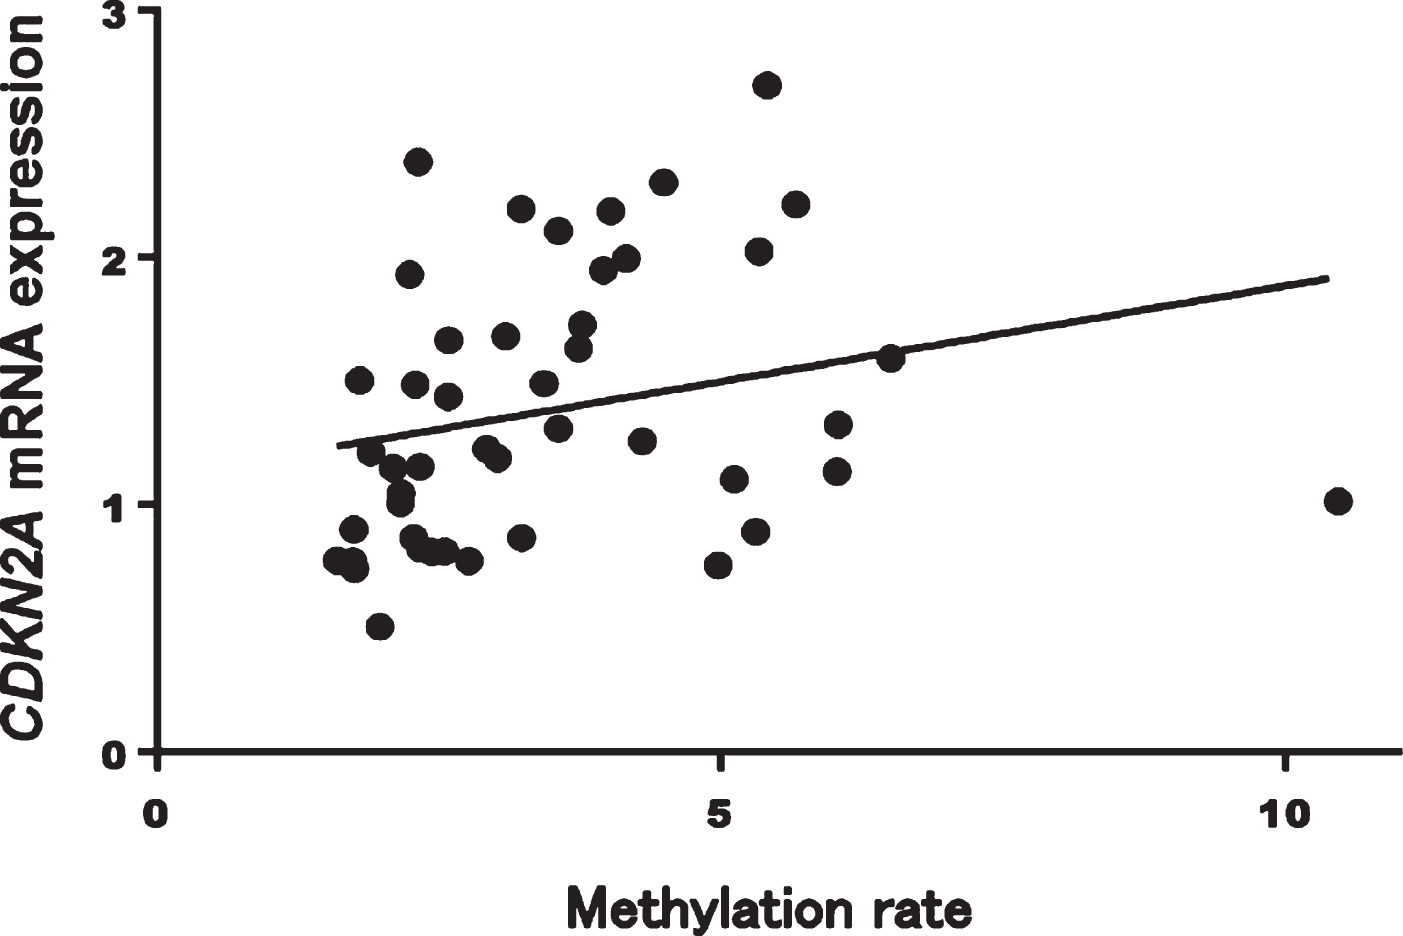 Mean methylation rates of all sites were significantly correlated with CDKN2A mRNA expression in patients with AD (Spearman’s rank correlation coefficient: r = 0.42, p = 0.003). AD, Alzheimer’s disease.